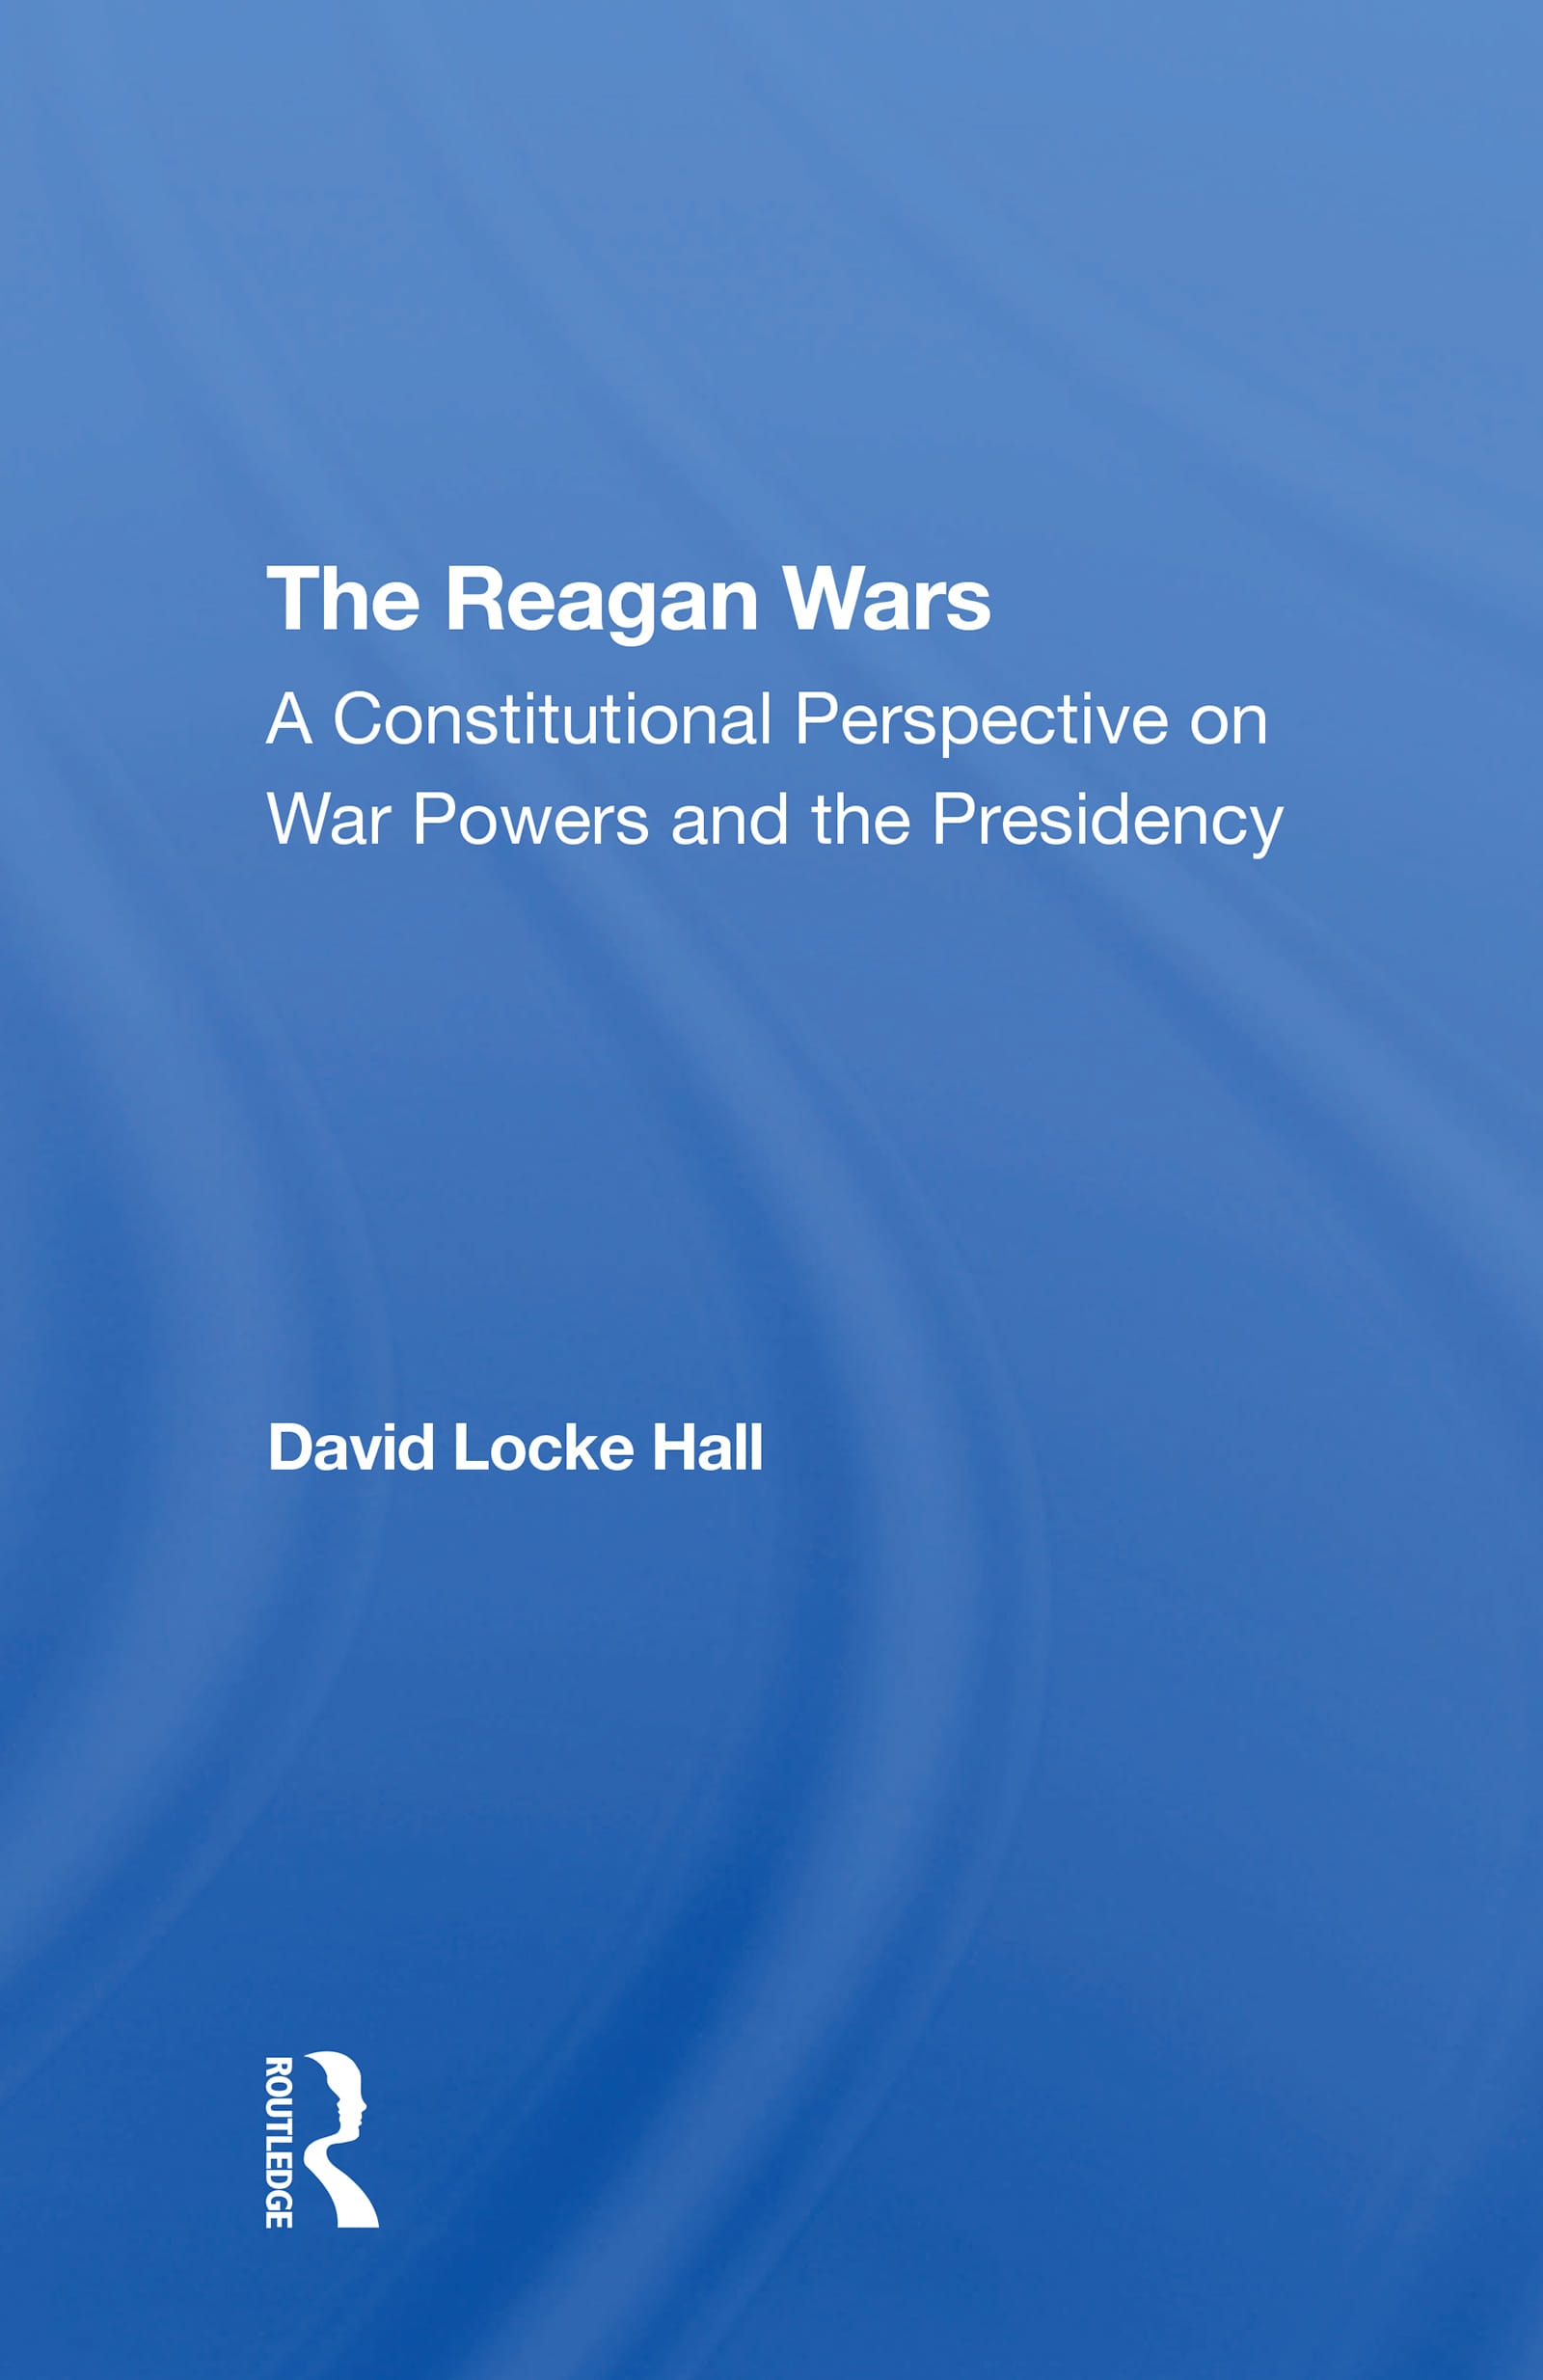 The Reagan Wars: A Constitutional Perspective on War Powers and the Presidency